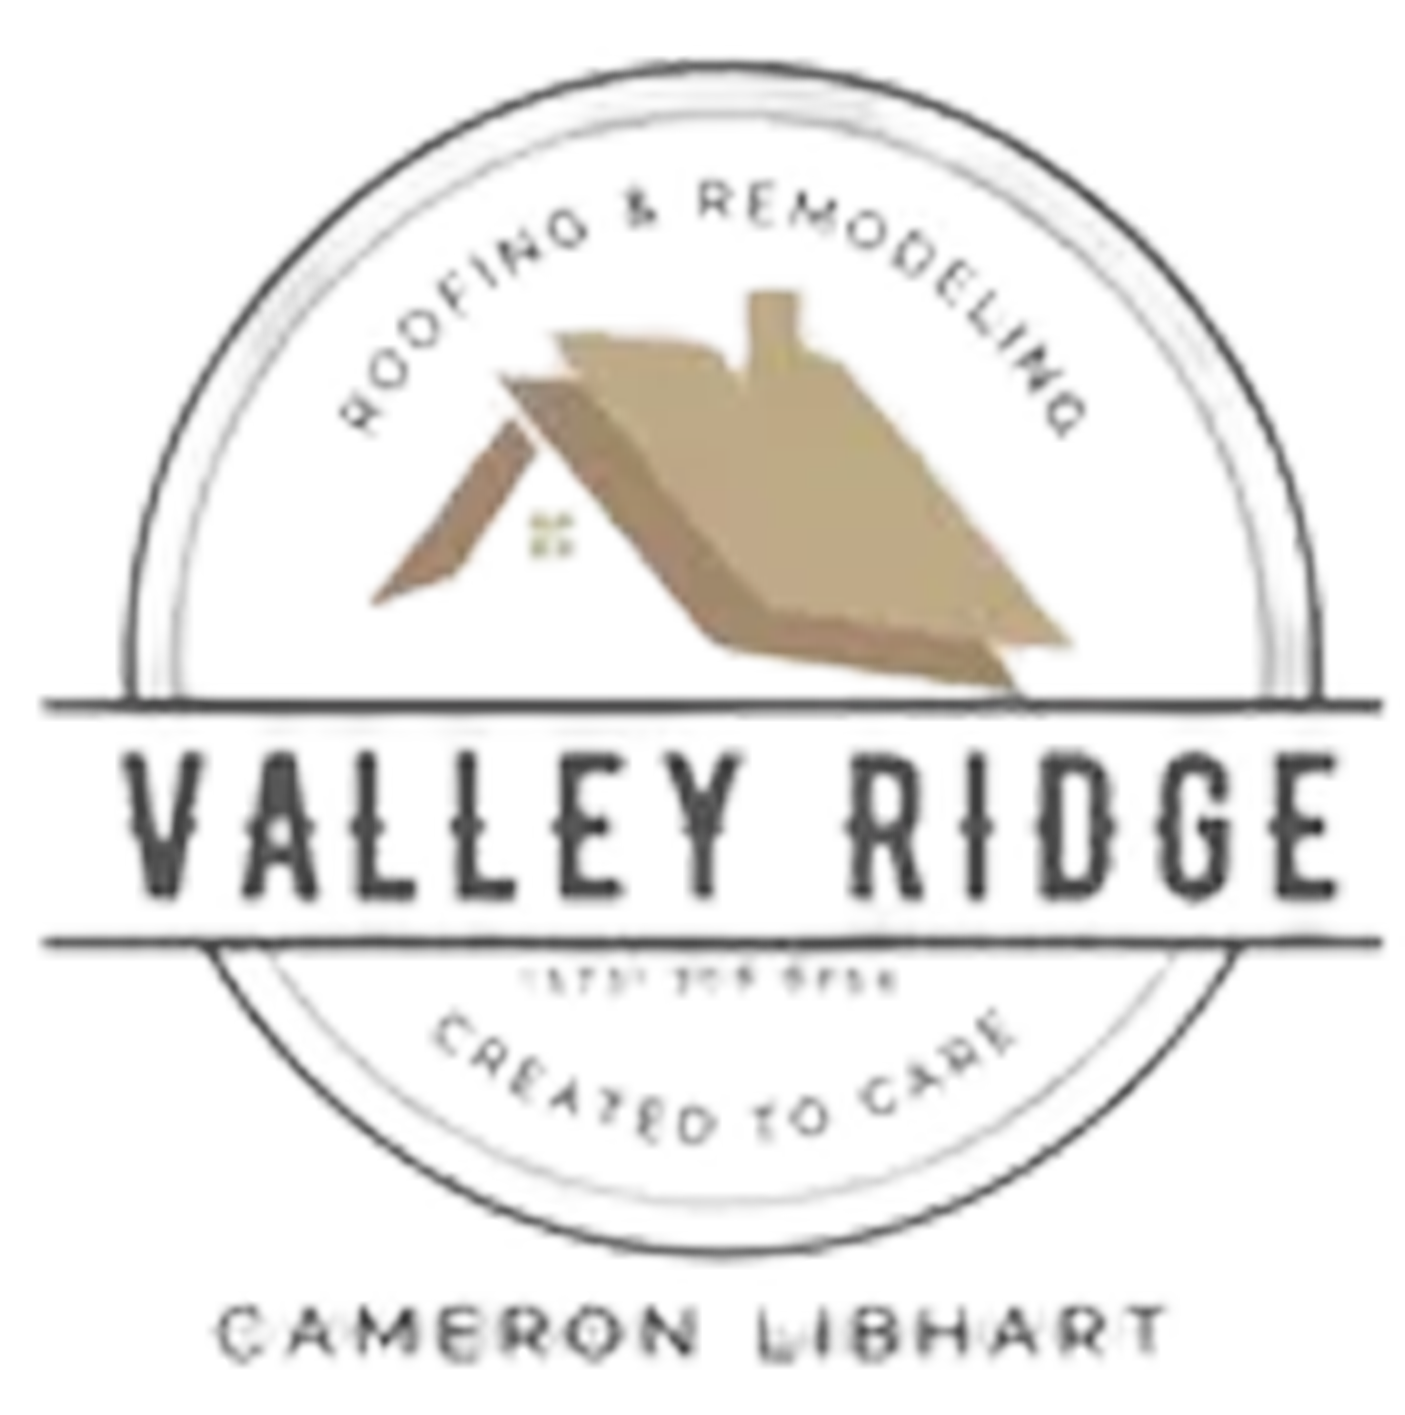 Valley Ridge Roofing & Remodeling